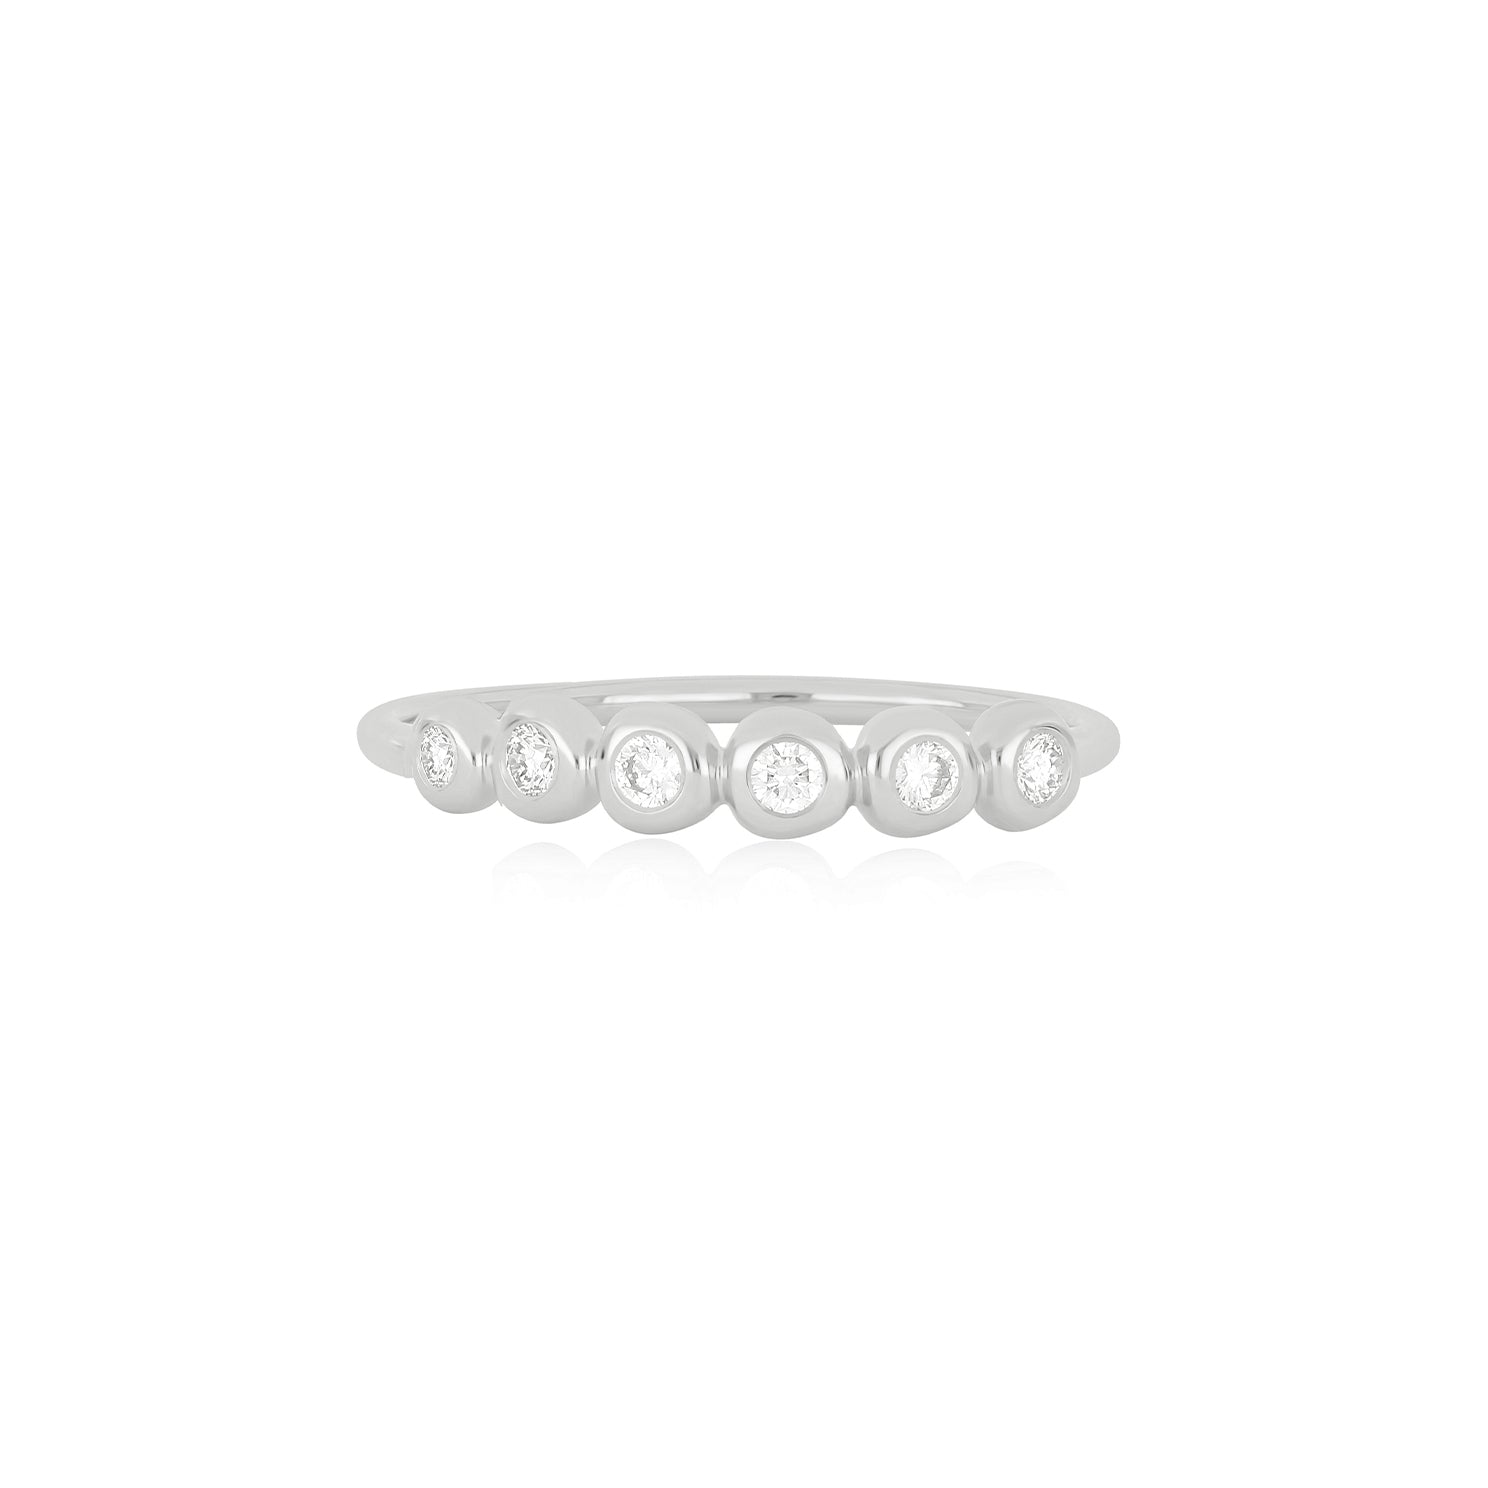 Diamond Pillow Stack Ring in white gold